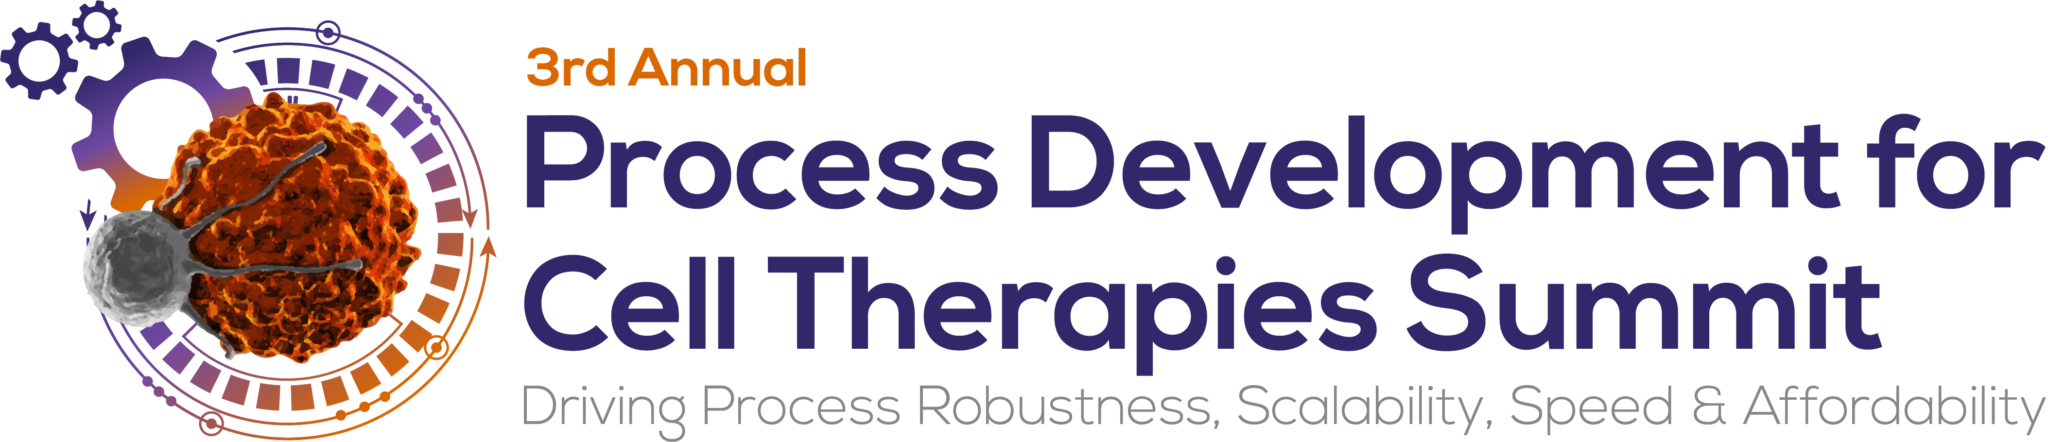 3rd-Annual-Process-Development-Cell-Therapies-Summit-2048x442